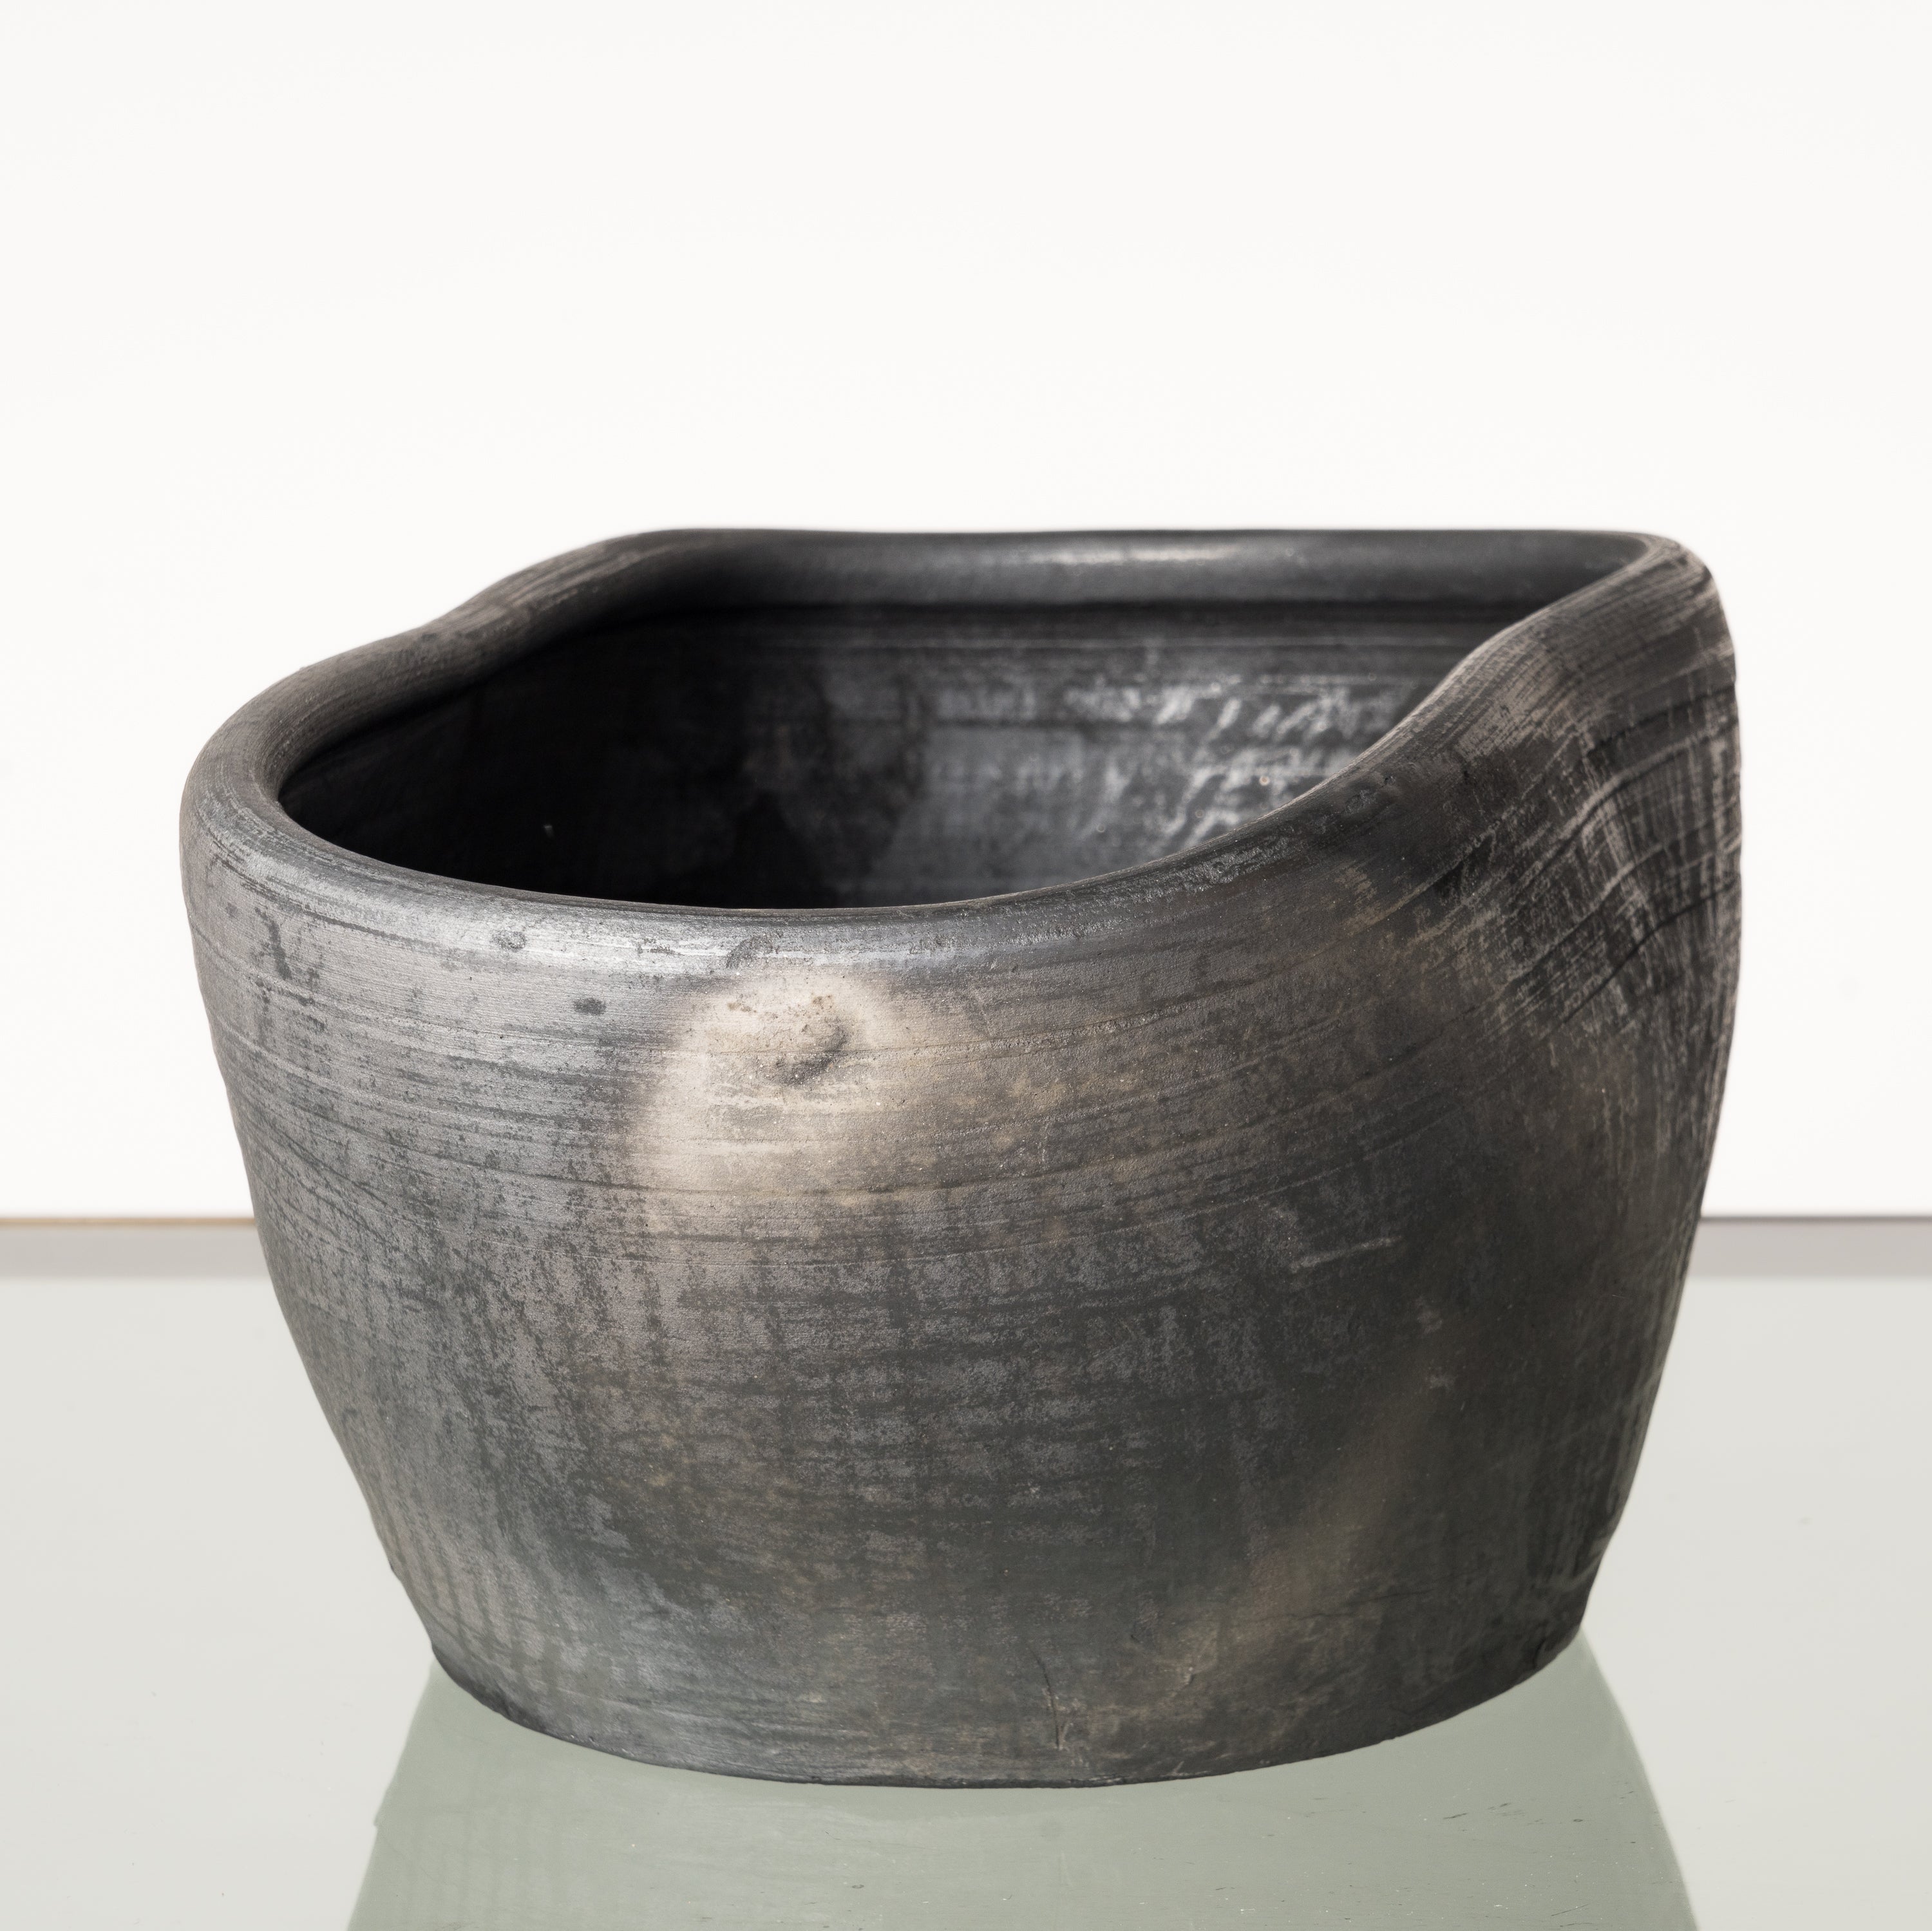 Brutalist Charcoal and Silver Finish Terracotta Bowl by Facto Atelier Paris